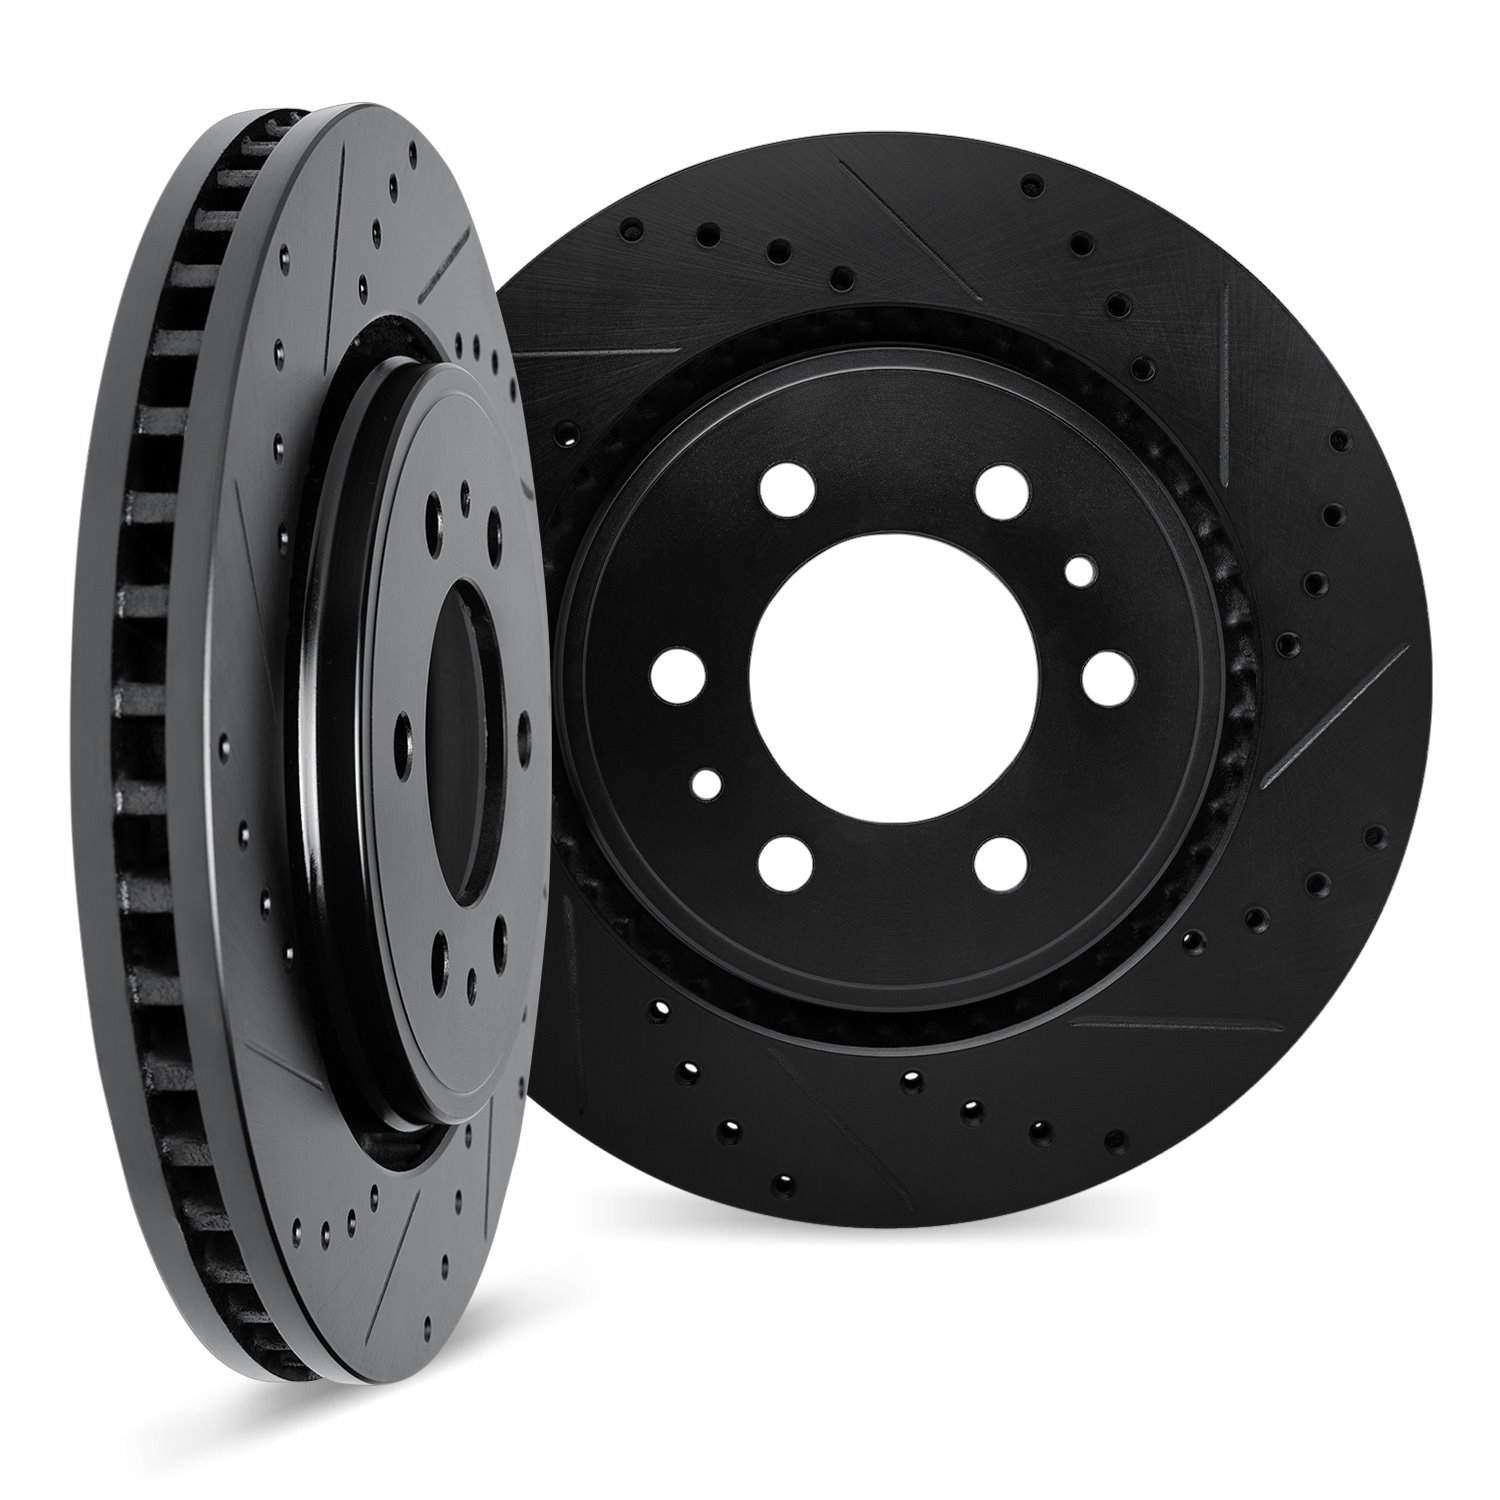 8002-67010 Drilled/Slotted Brake Rotors [Black], 1998-2004 Infiniti/Nissan, Position: Front